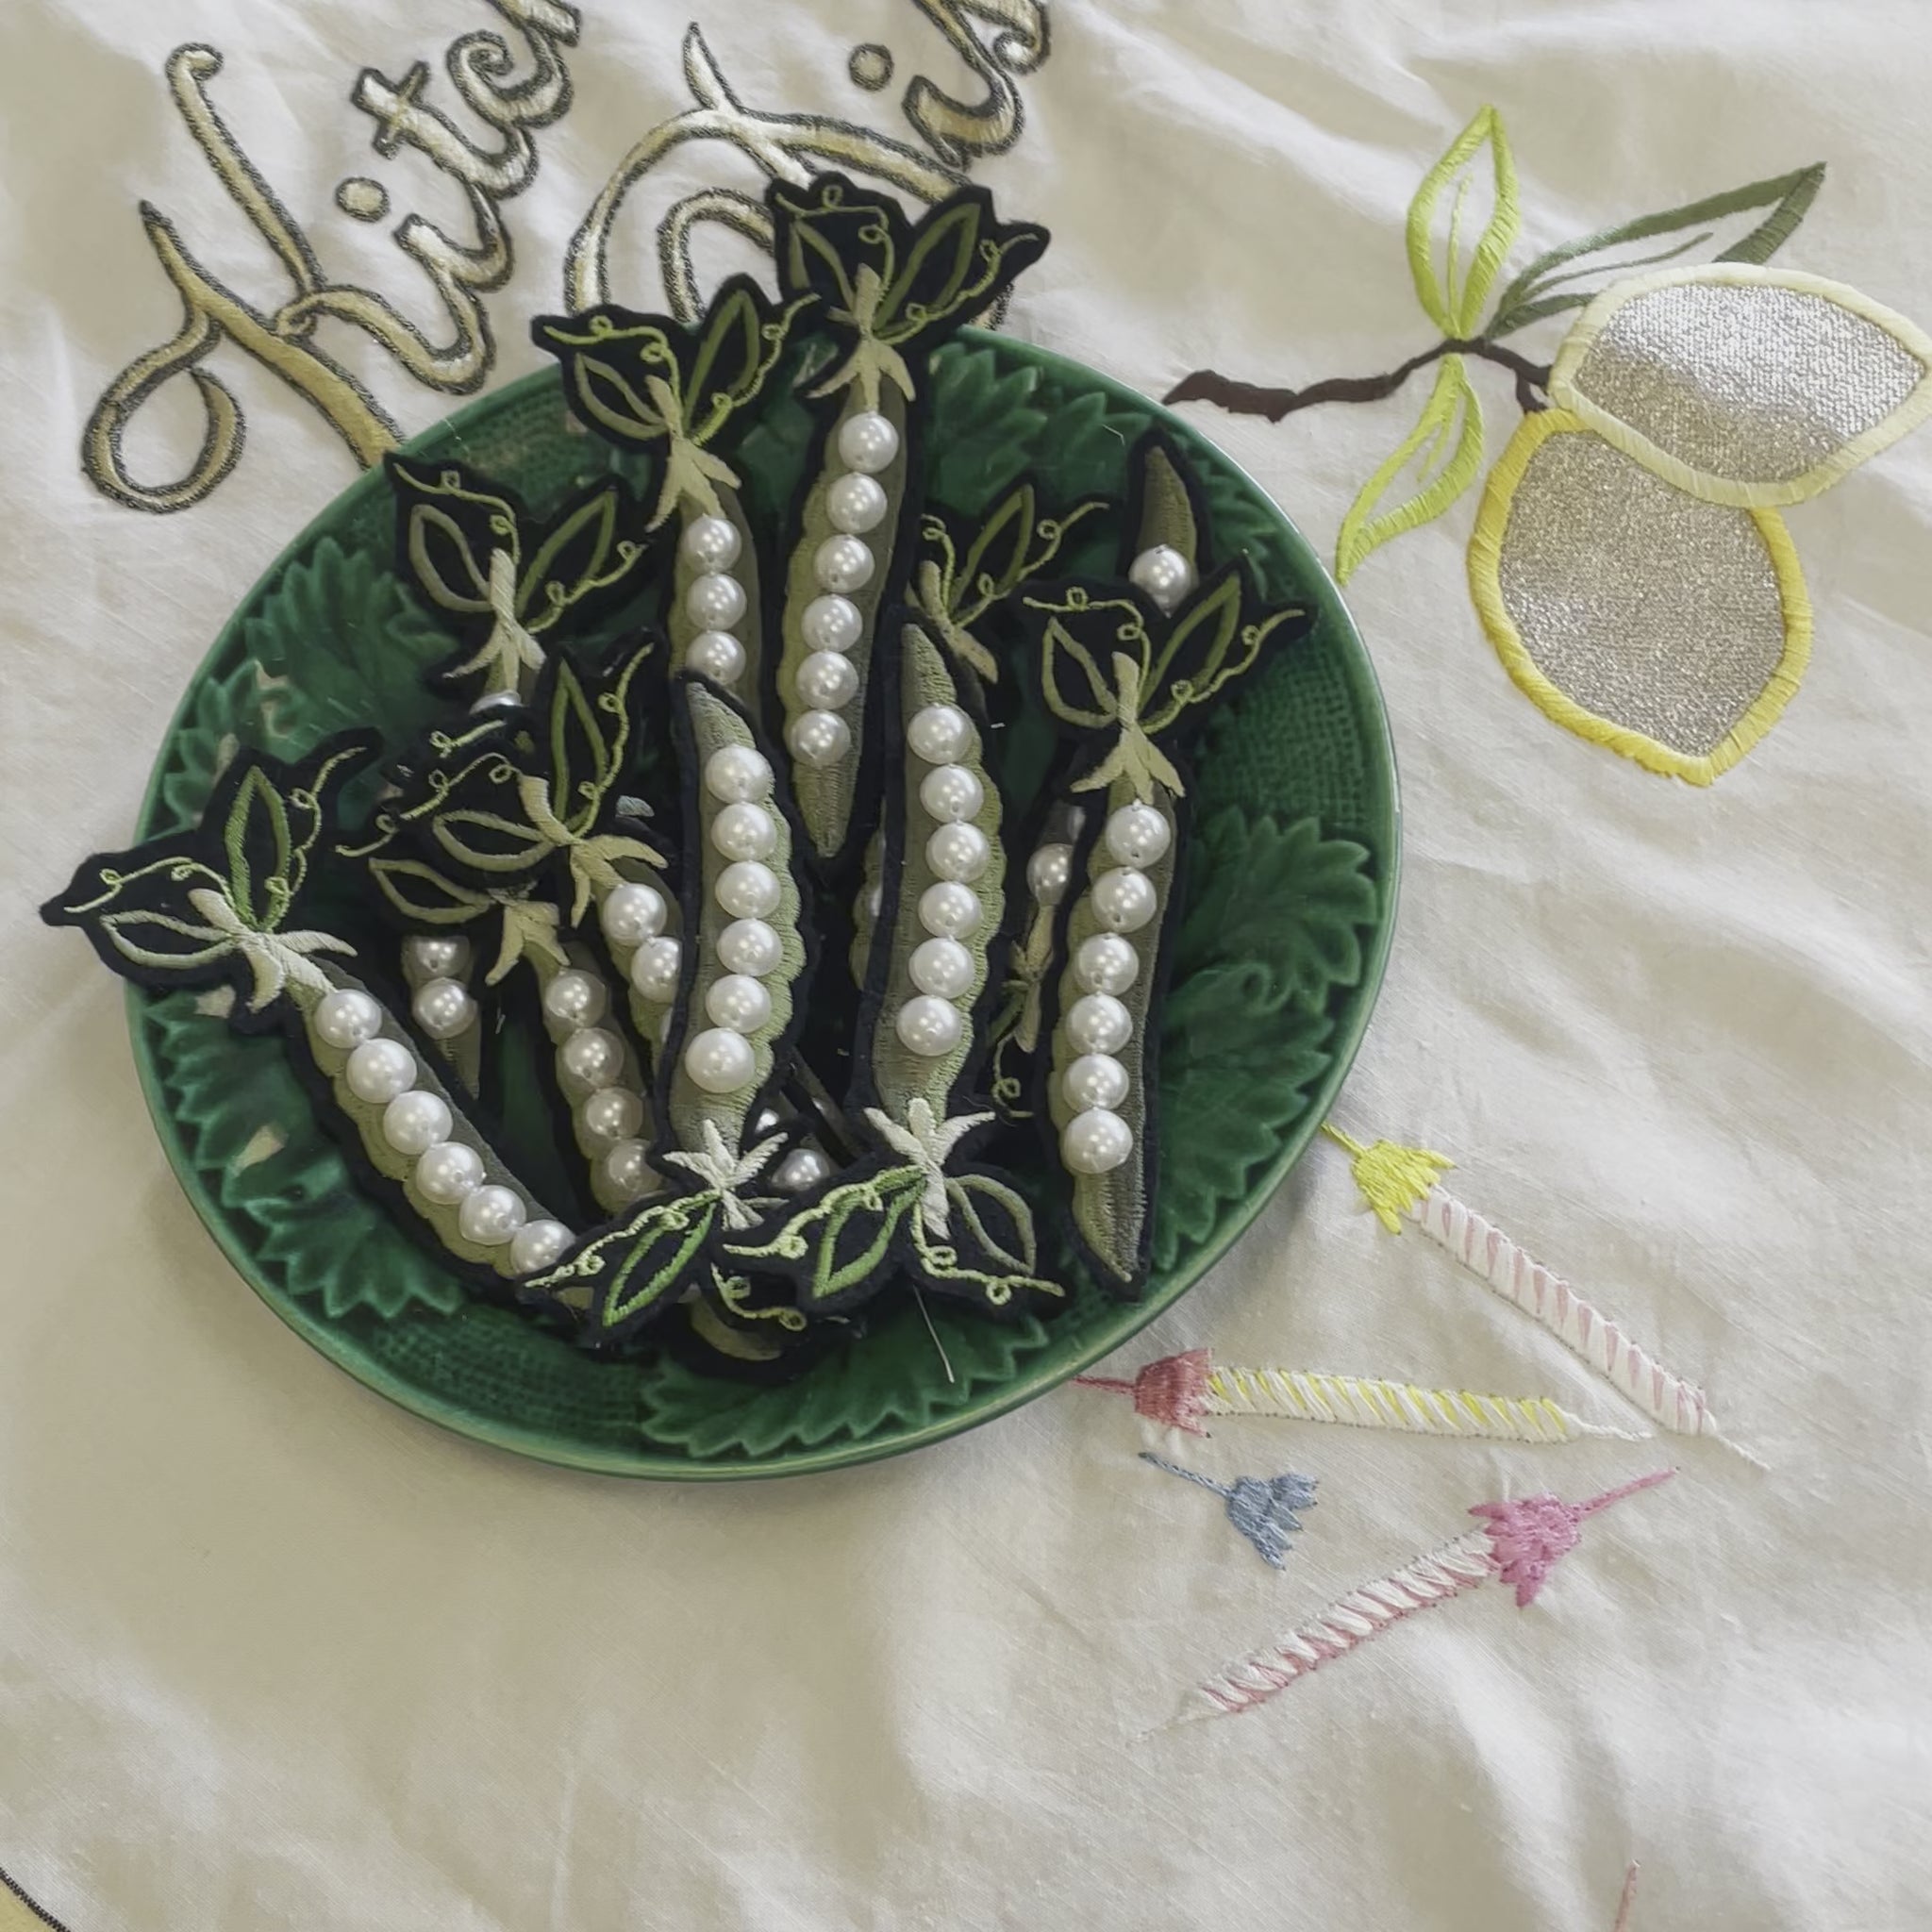 Video shows a green bowl with a number of pea and pearl embroidered patches on an embroidered table cloth. A hand picks up one of the pea patches and holds it closer to the camera